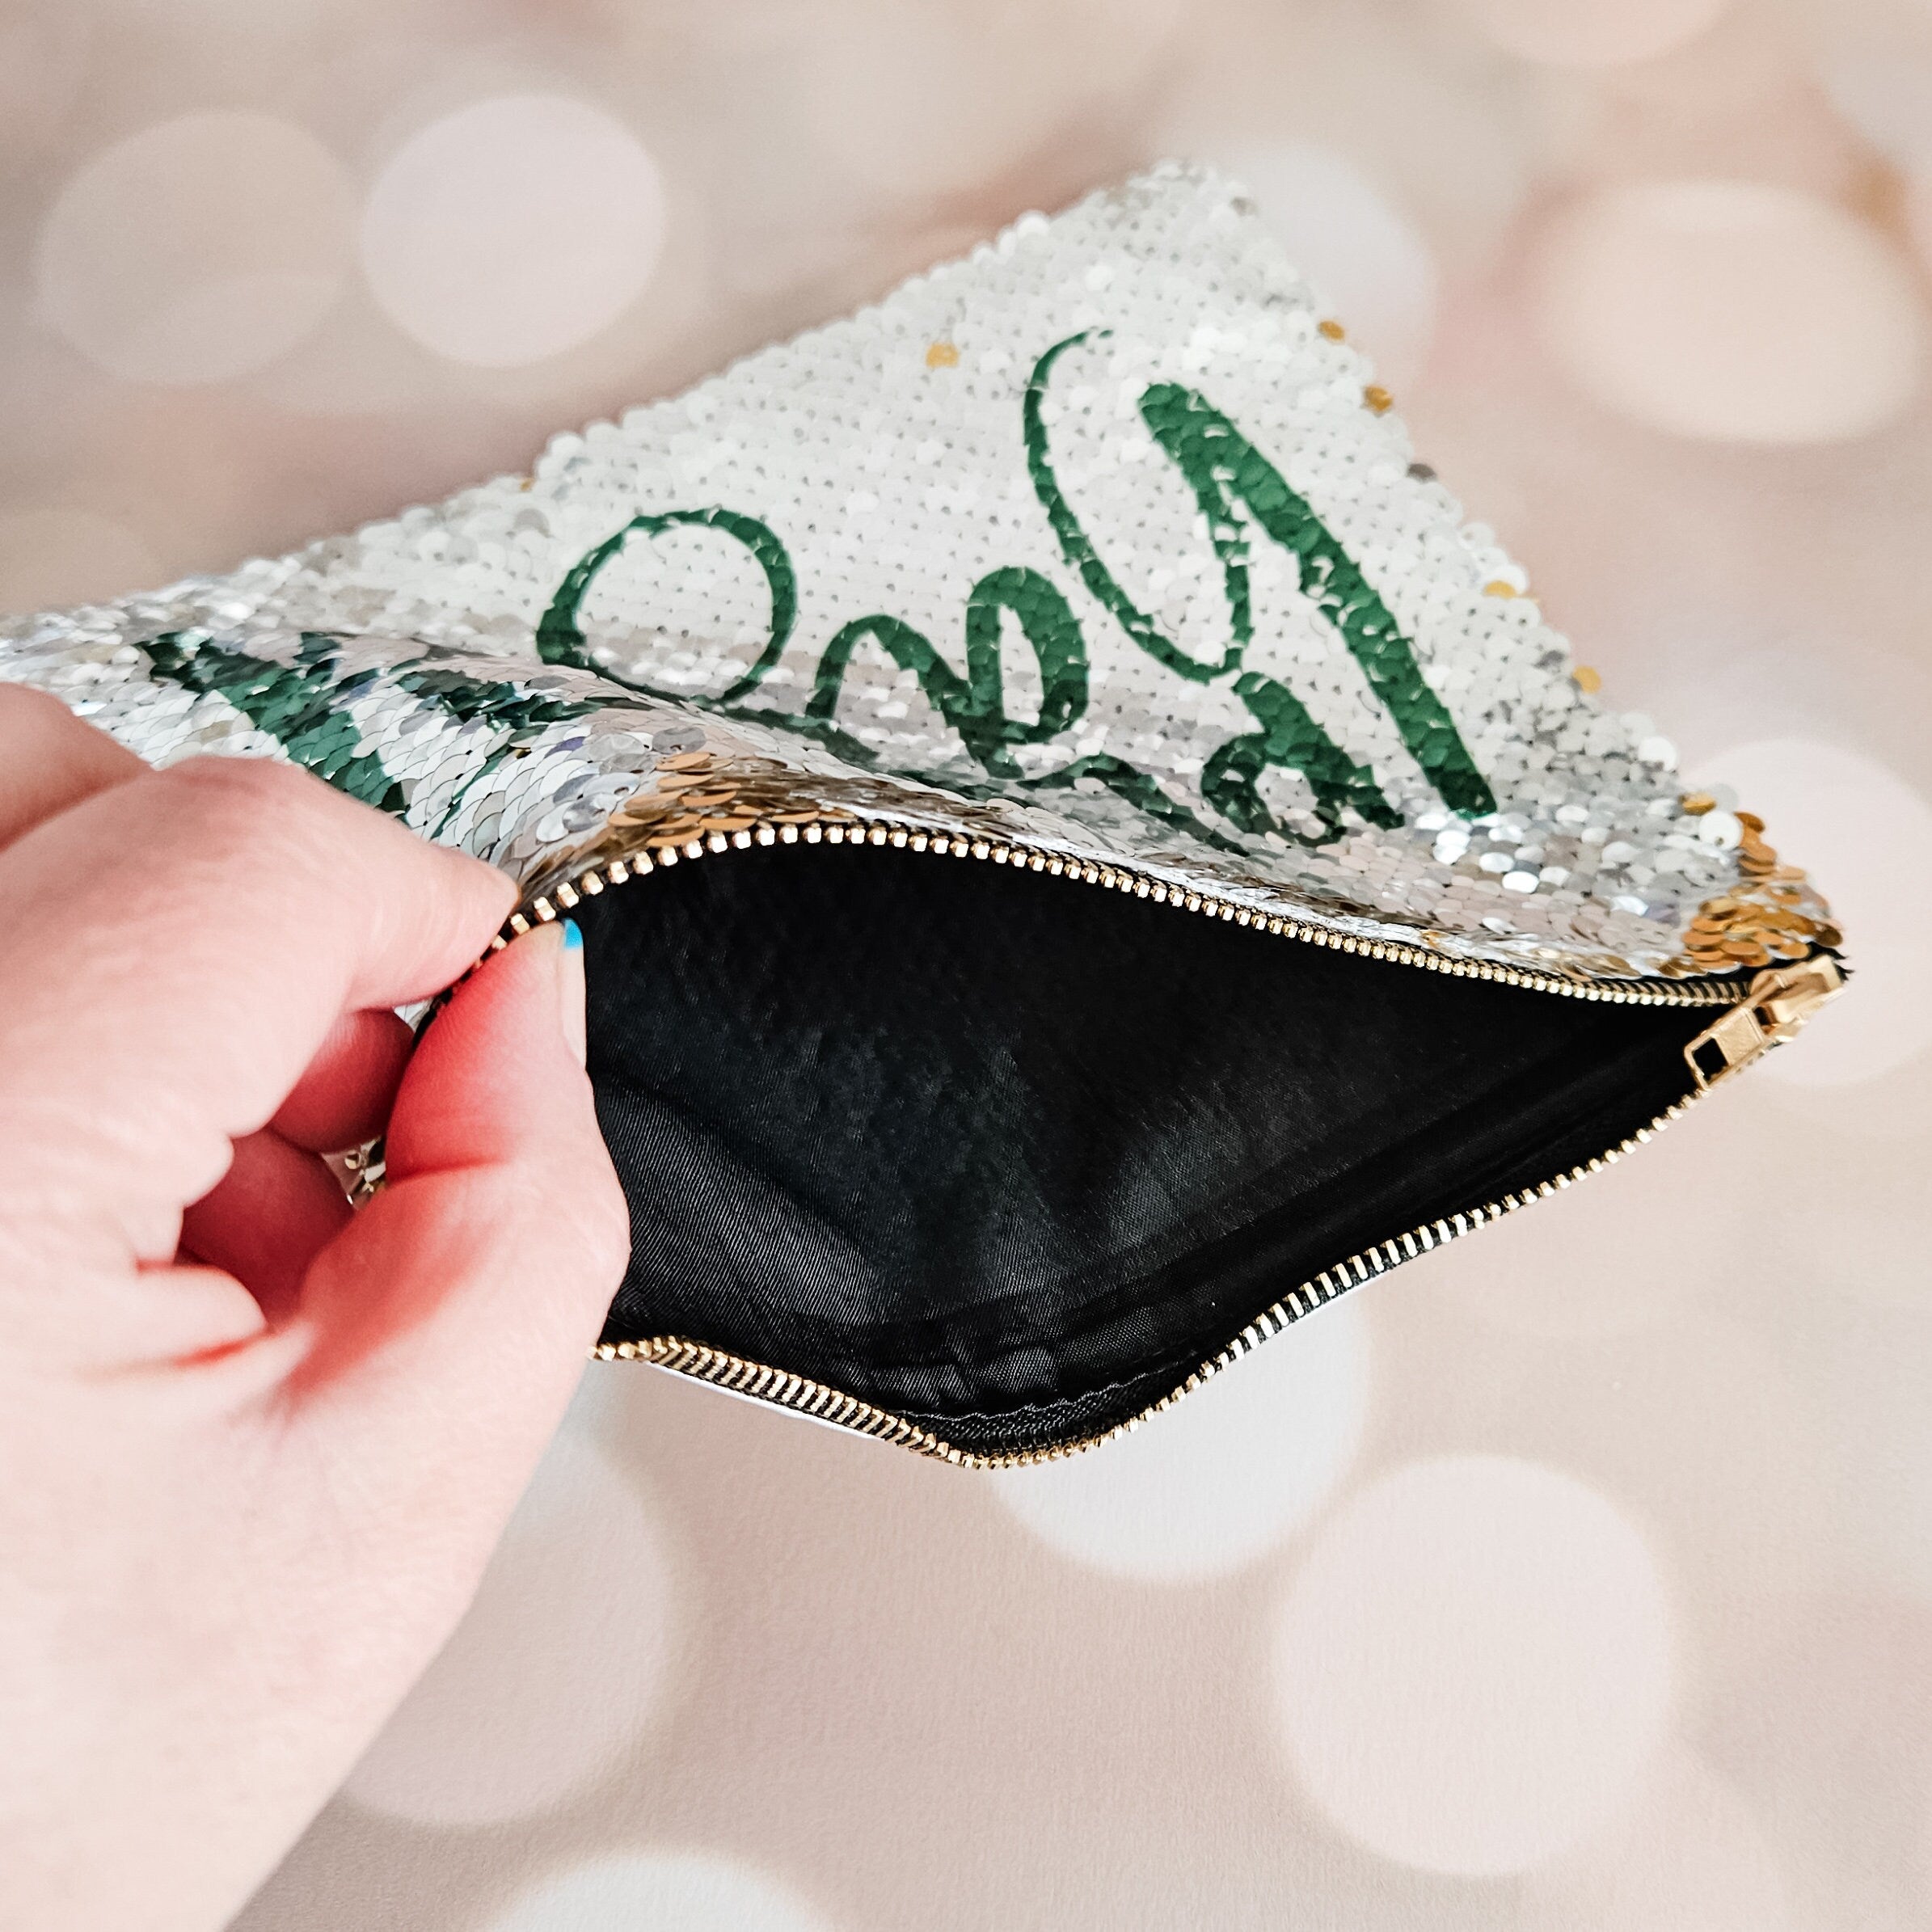 Plant Based 420 Sequin Cosmetic Case - Funny Weed Storage Pouch for Vegan Friend Salt and Sparkle